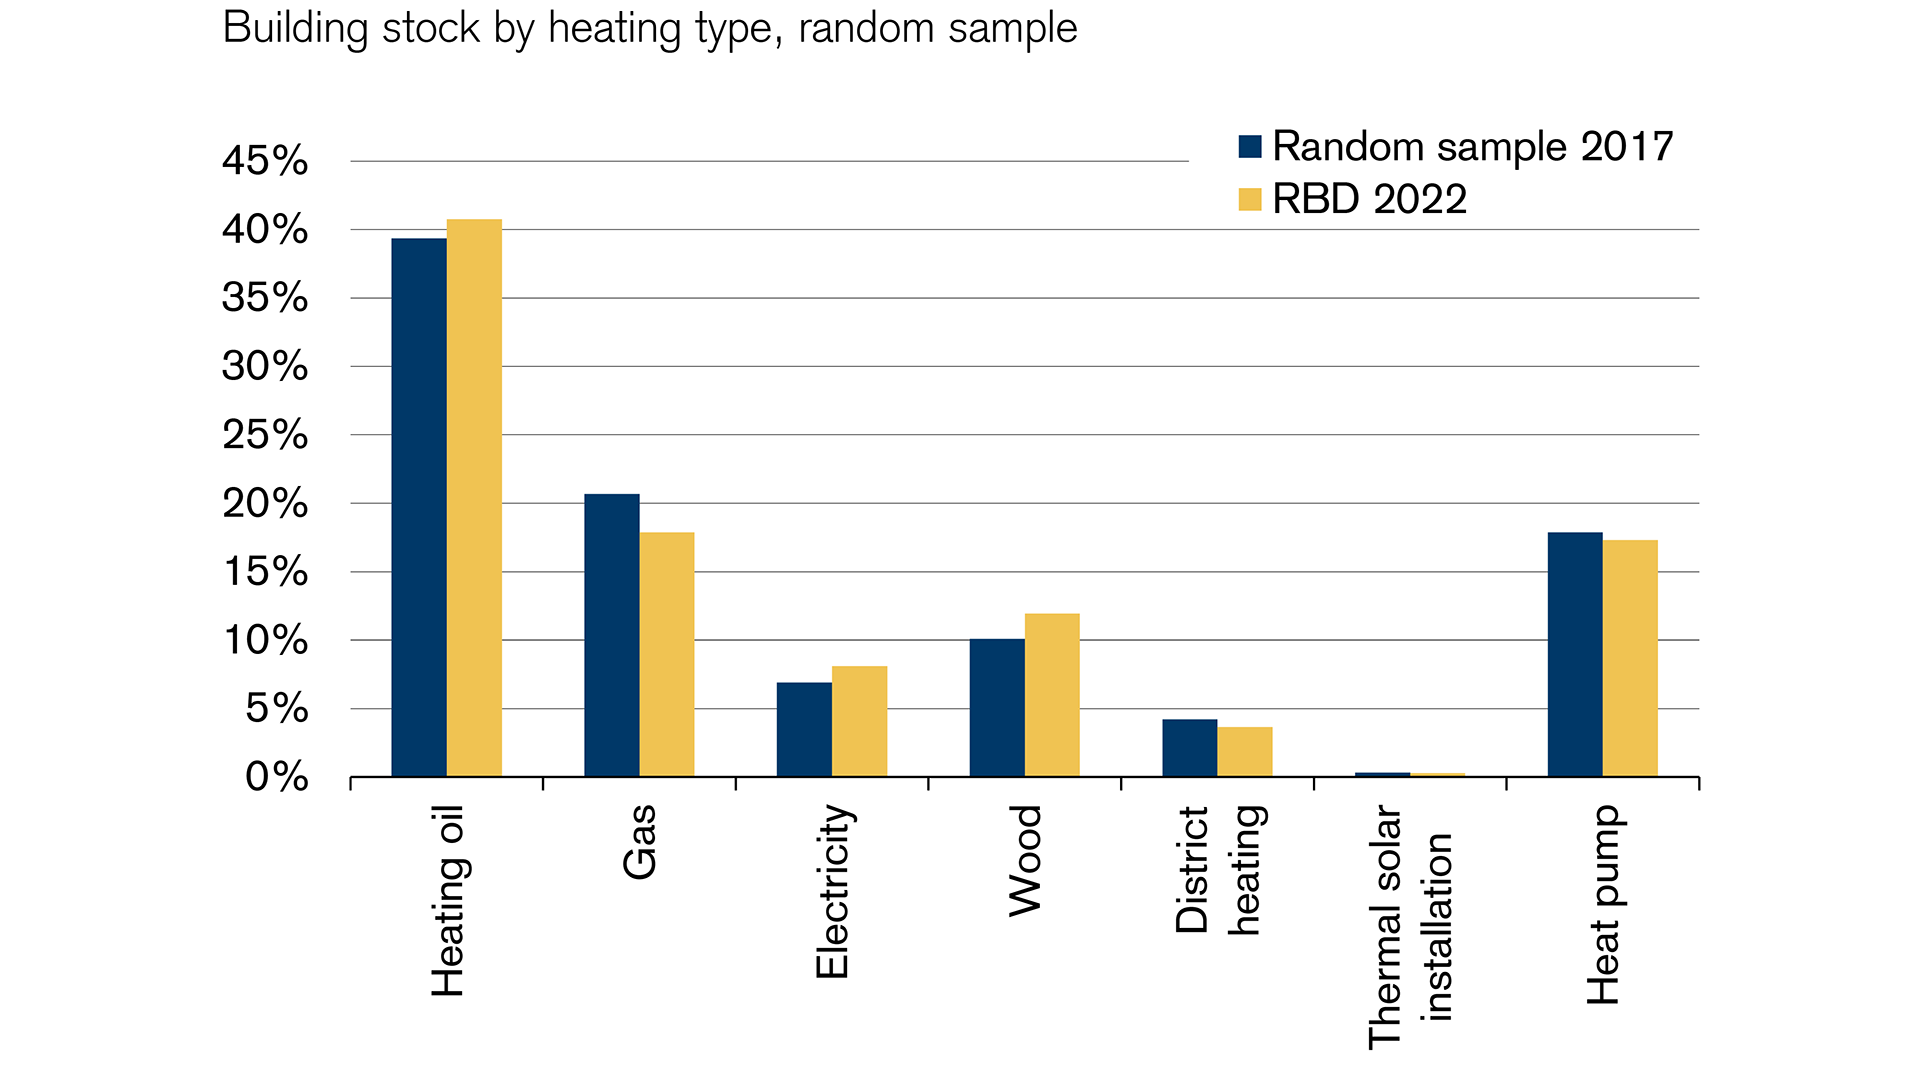 Real estate study: 60% of residential buildings are still heated with fossil fuels